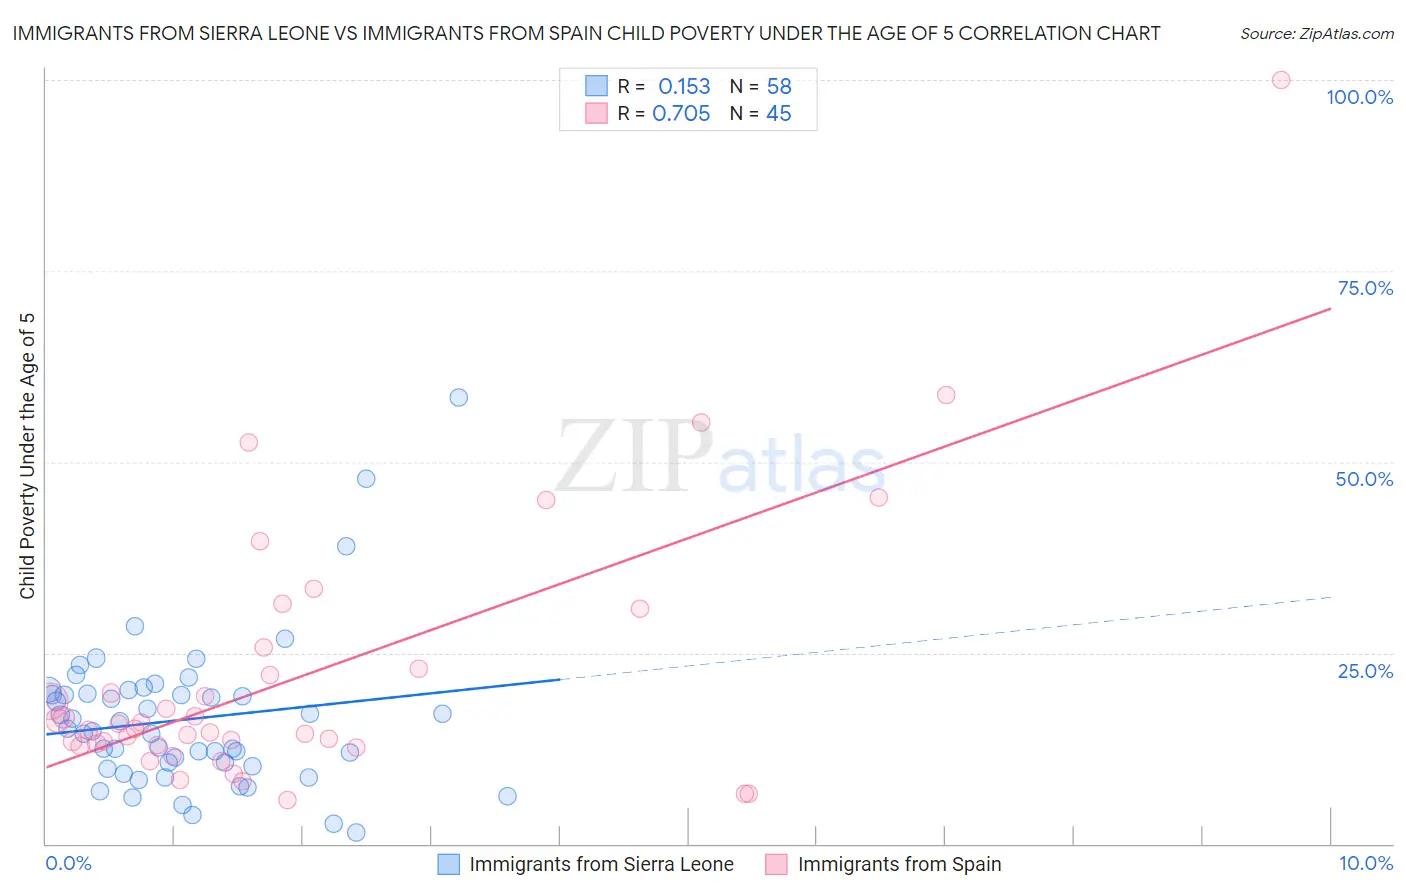 Immigrants from Sierra Leone vs Immigrants from Spain Child Poverty Under the Age of 5